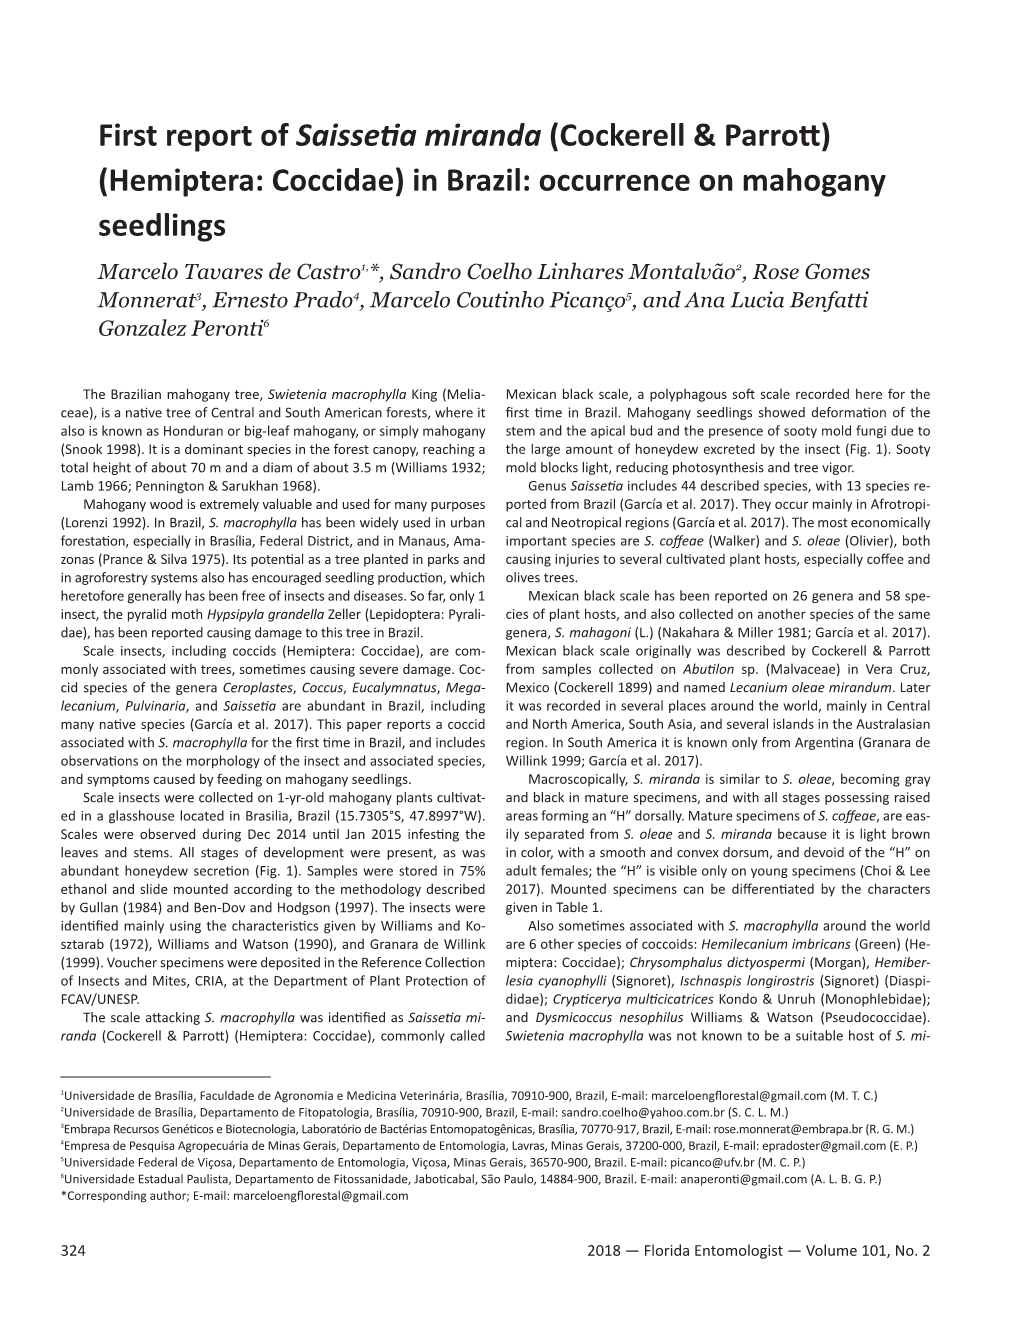 Hemiptera: Coccidae) in Brazil: Occurrence on Mahogany Seedlings